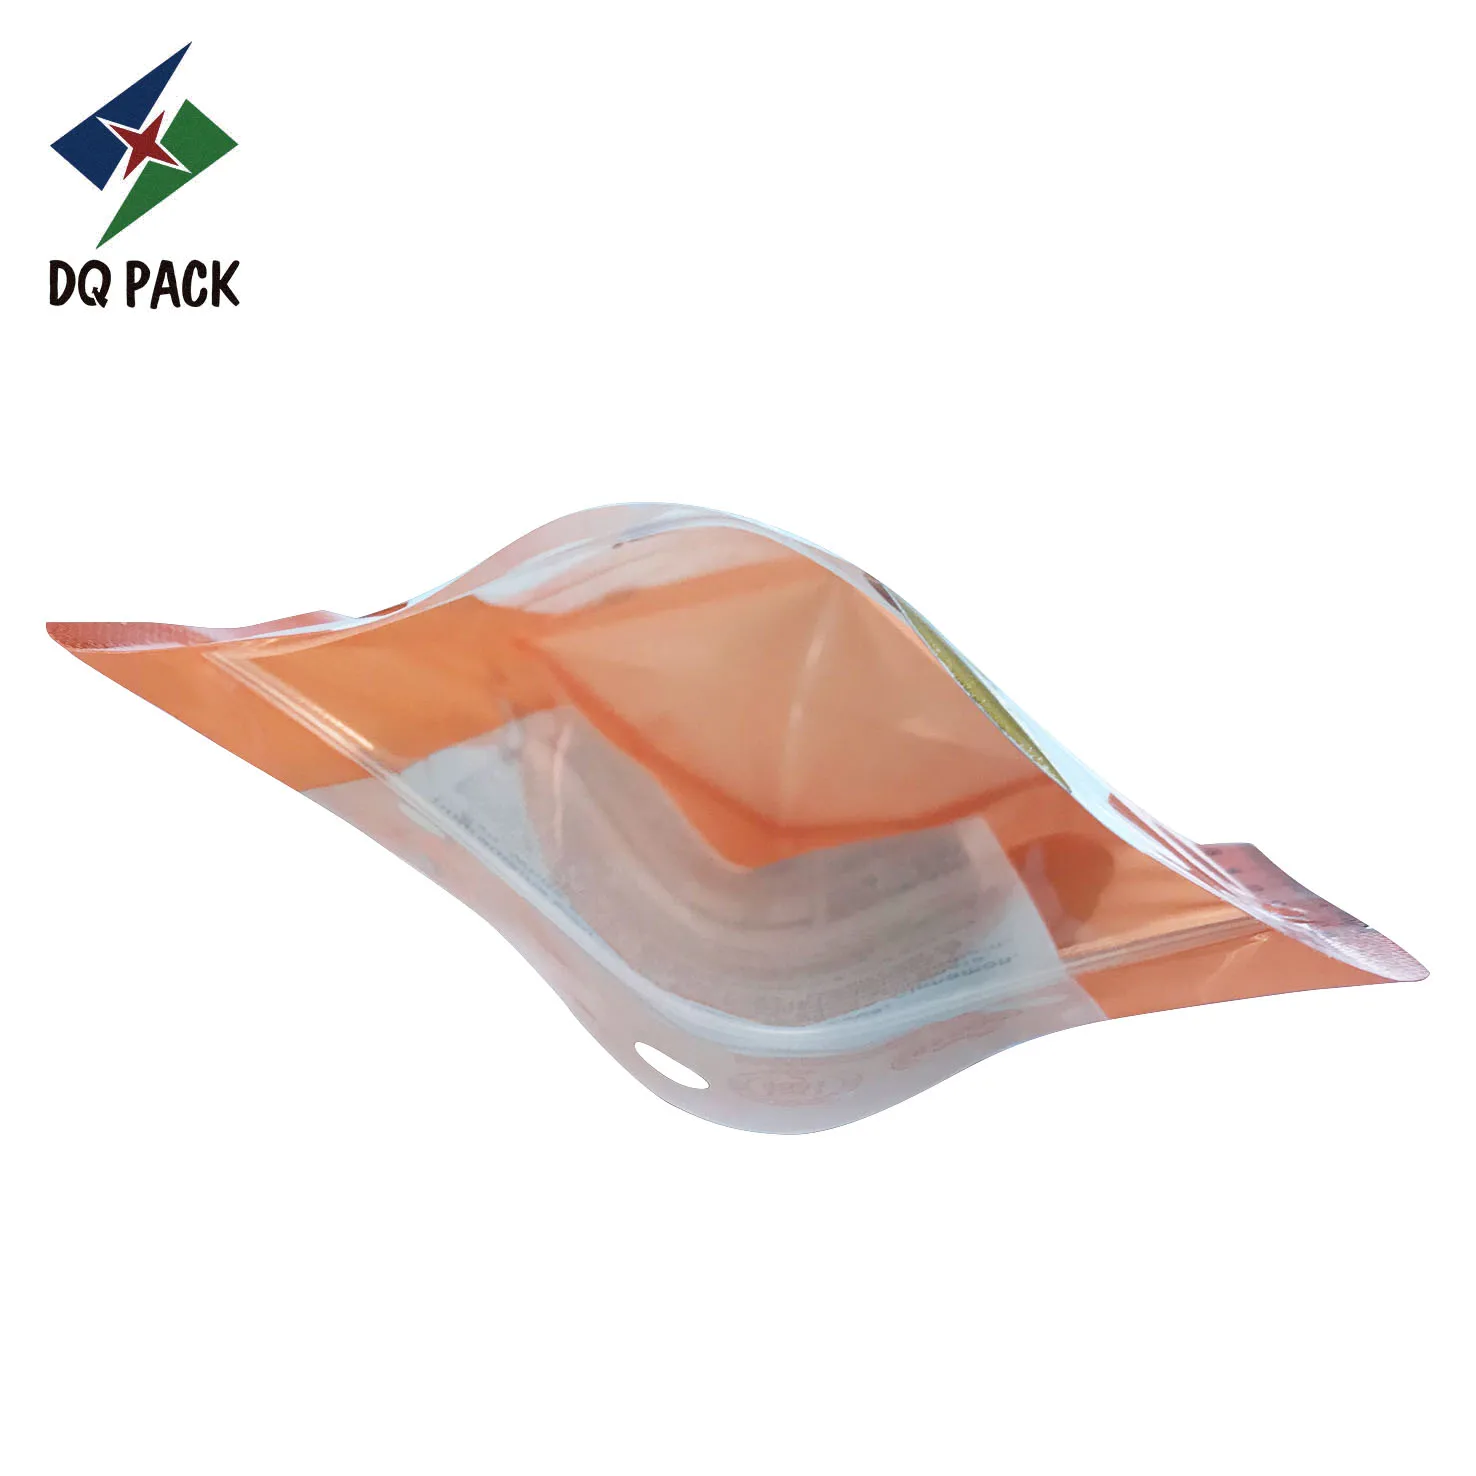 DQ PACK Gold Blocking Logo Clear Bag with zipper for Sunflower seeds Plastic Pouch